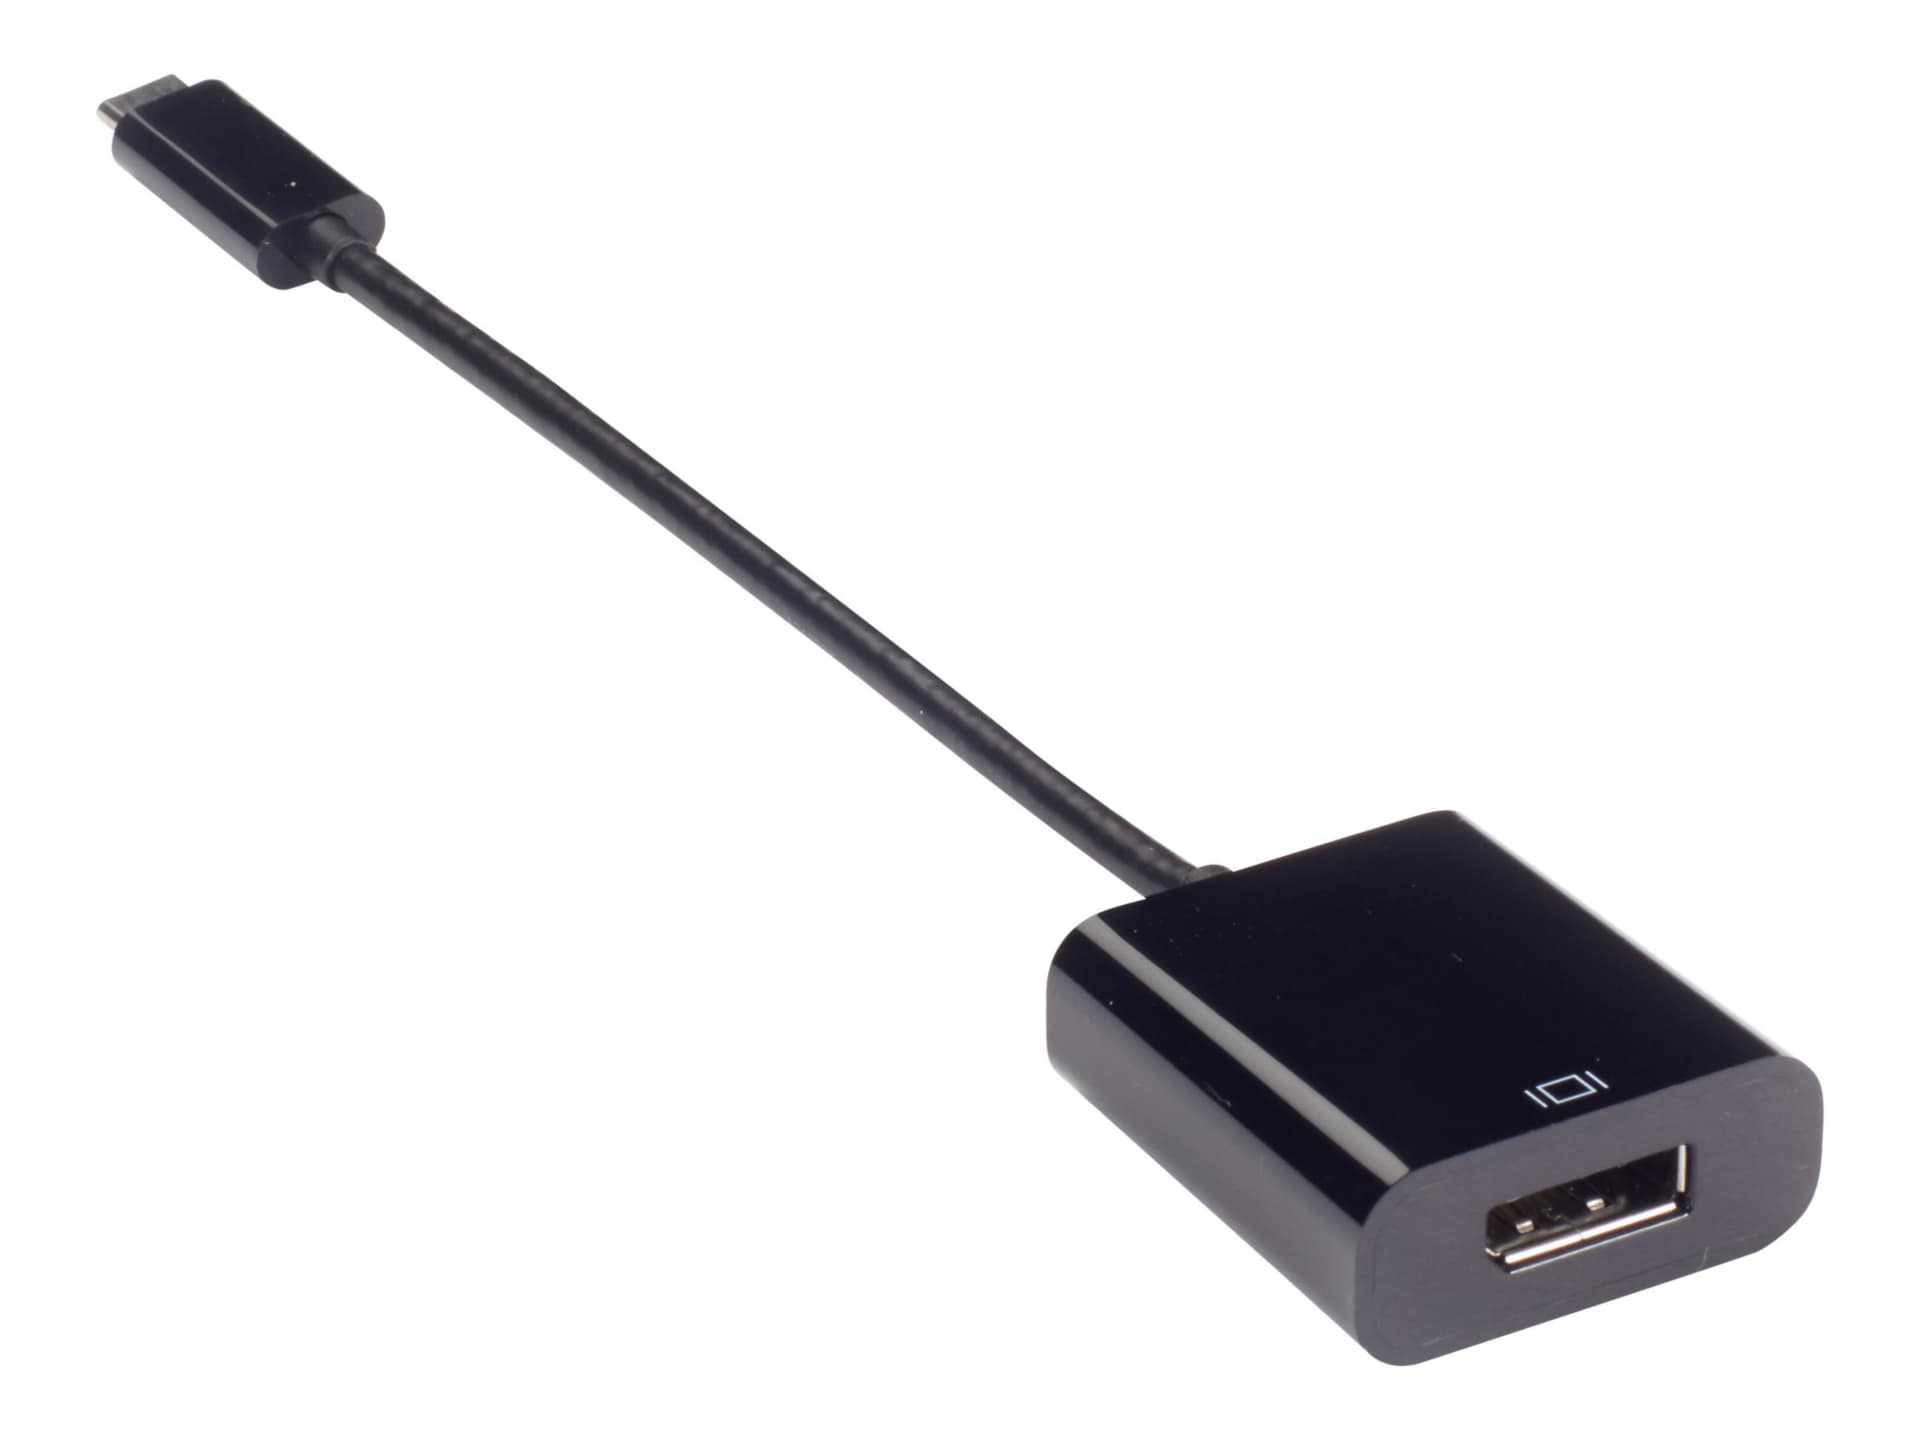 Black Box Video Adapter Dongle USB 3.1 Type C Male to DisplayPort 1.2 Female - external video adapter